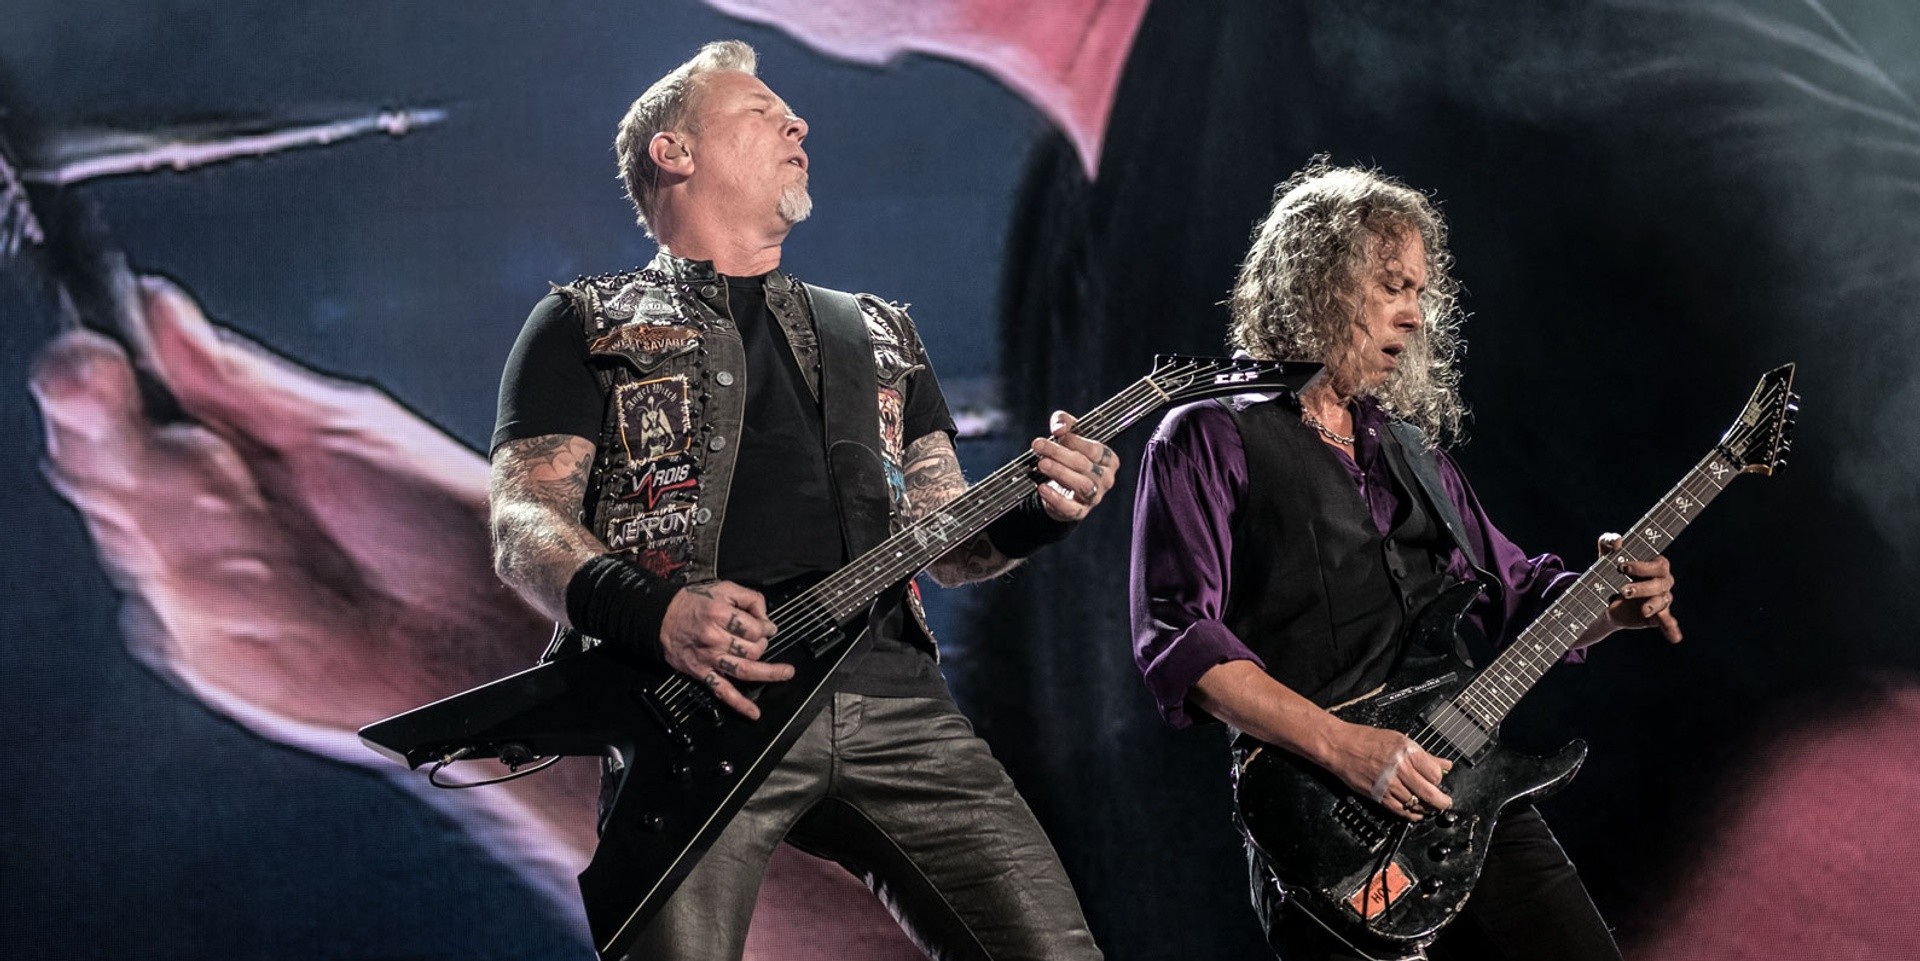 CONTEST: Win a pair of tickets to catch Metallica live in Singapore